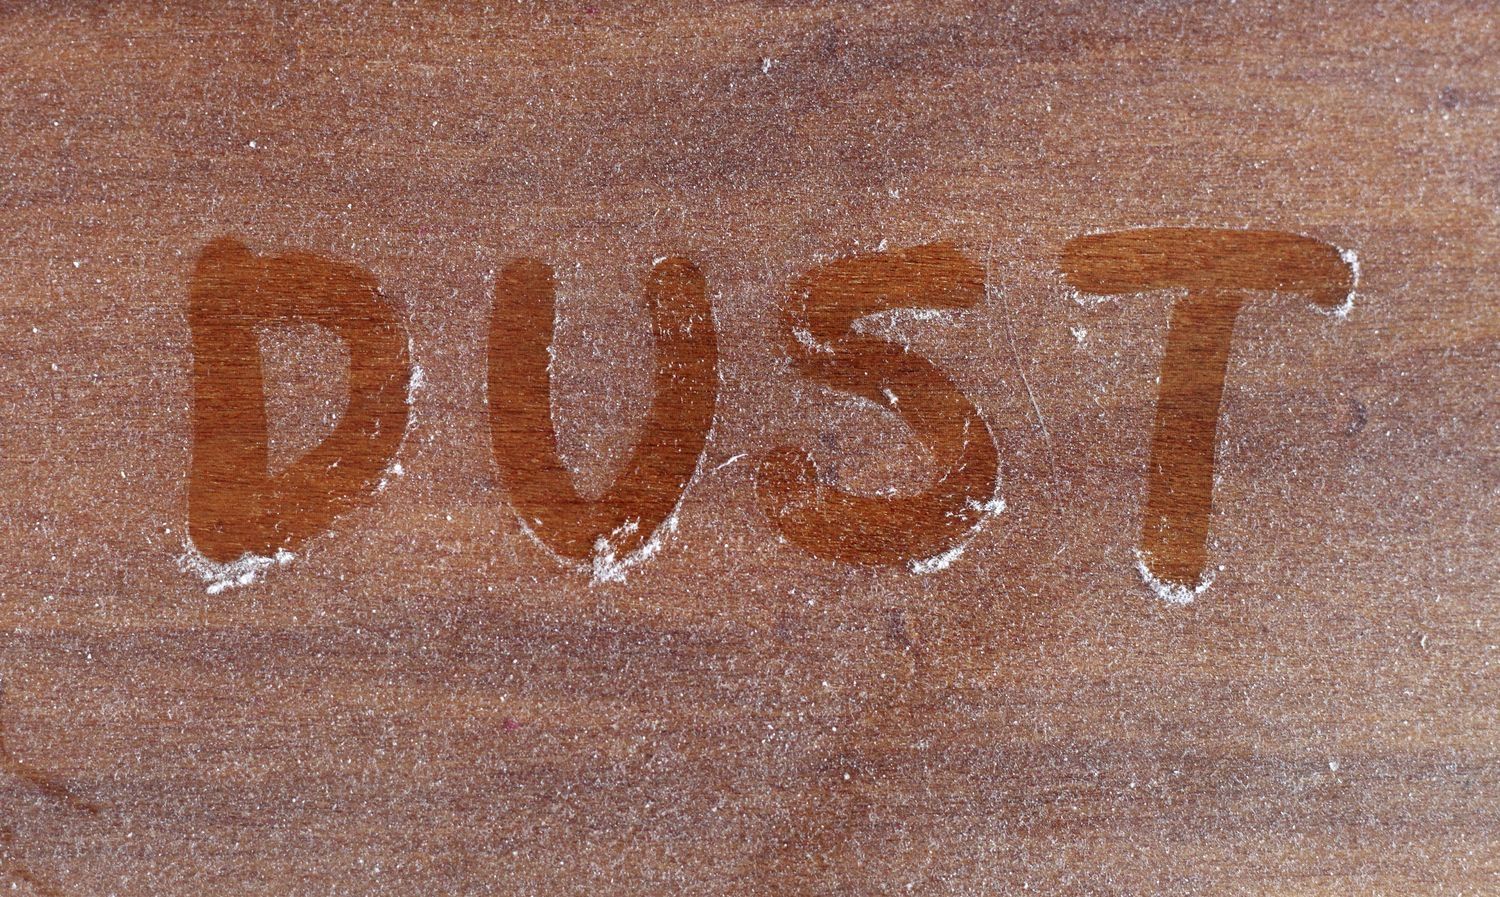 dust dream meaning, dream about dust, dust dream interpretation, seeing in a dream dust